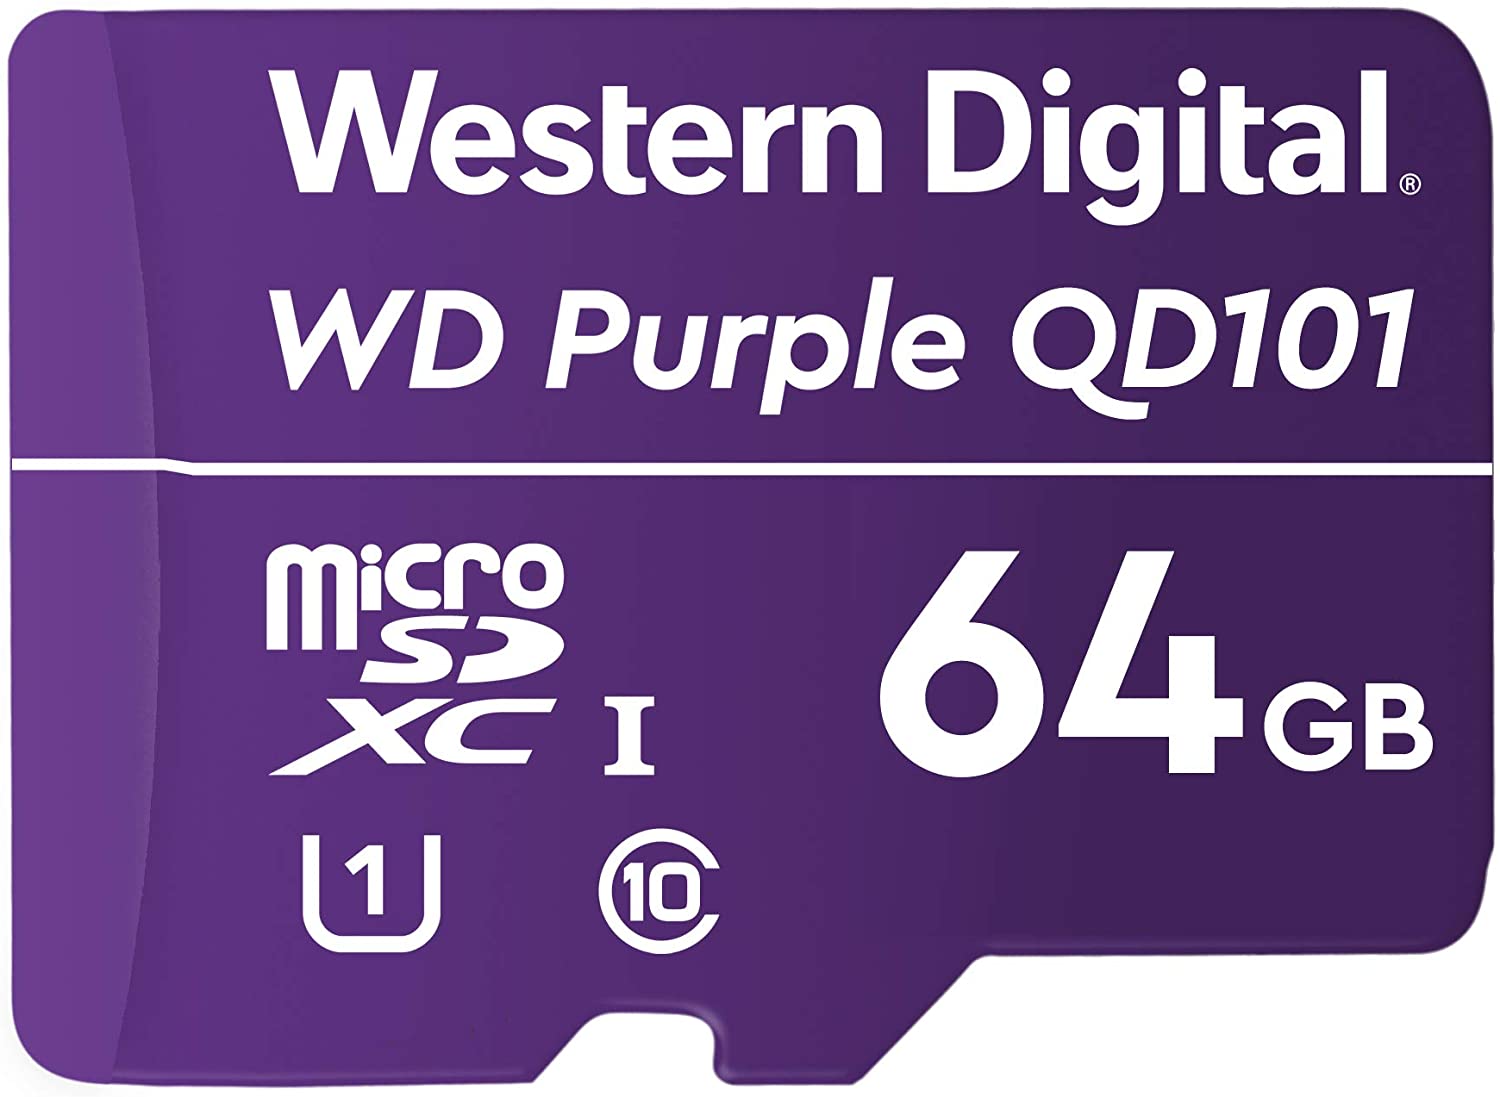 Western Digital WD Purple 64GB MicroSDXC Card 24/7 -25°C to 85°C Weather & Humidity Resistant for Surveillance IP Cameras mDVRs NVR Dash Cams Drones